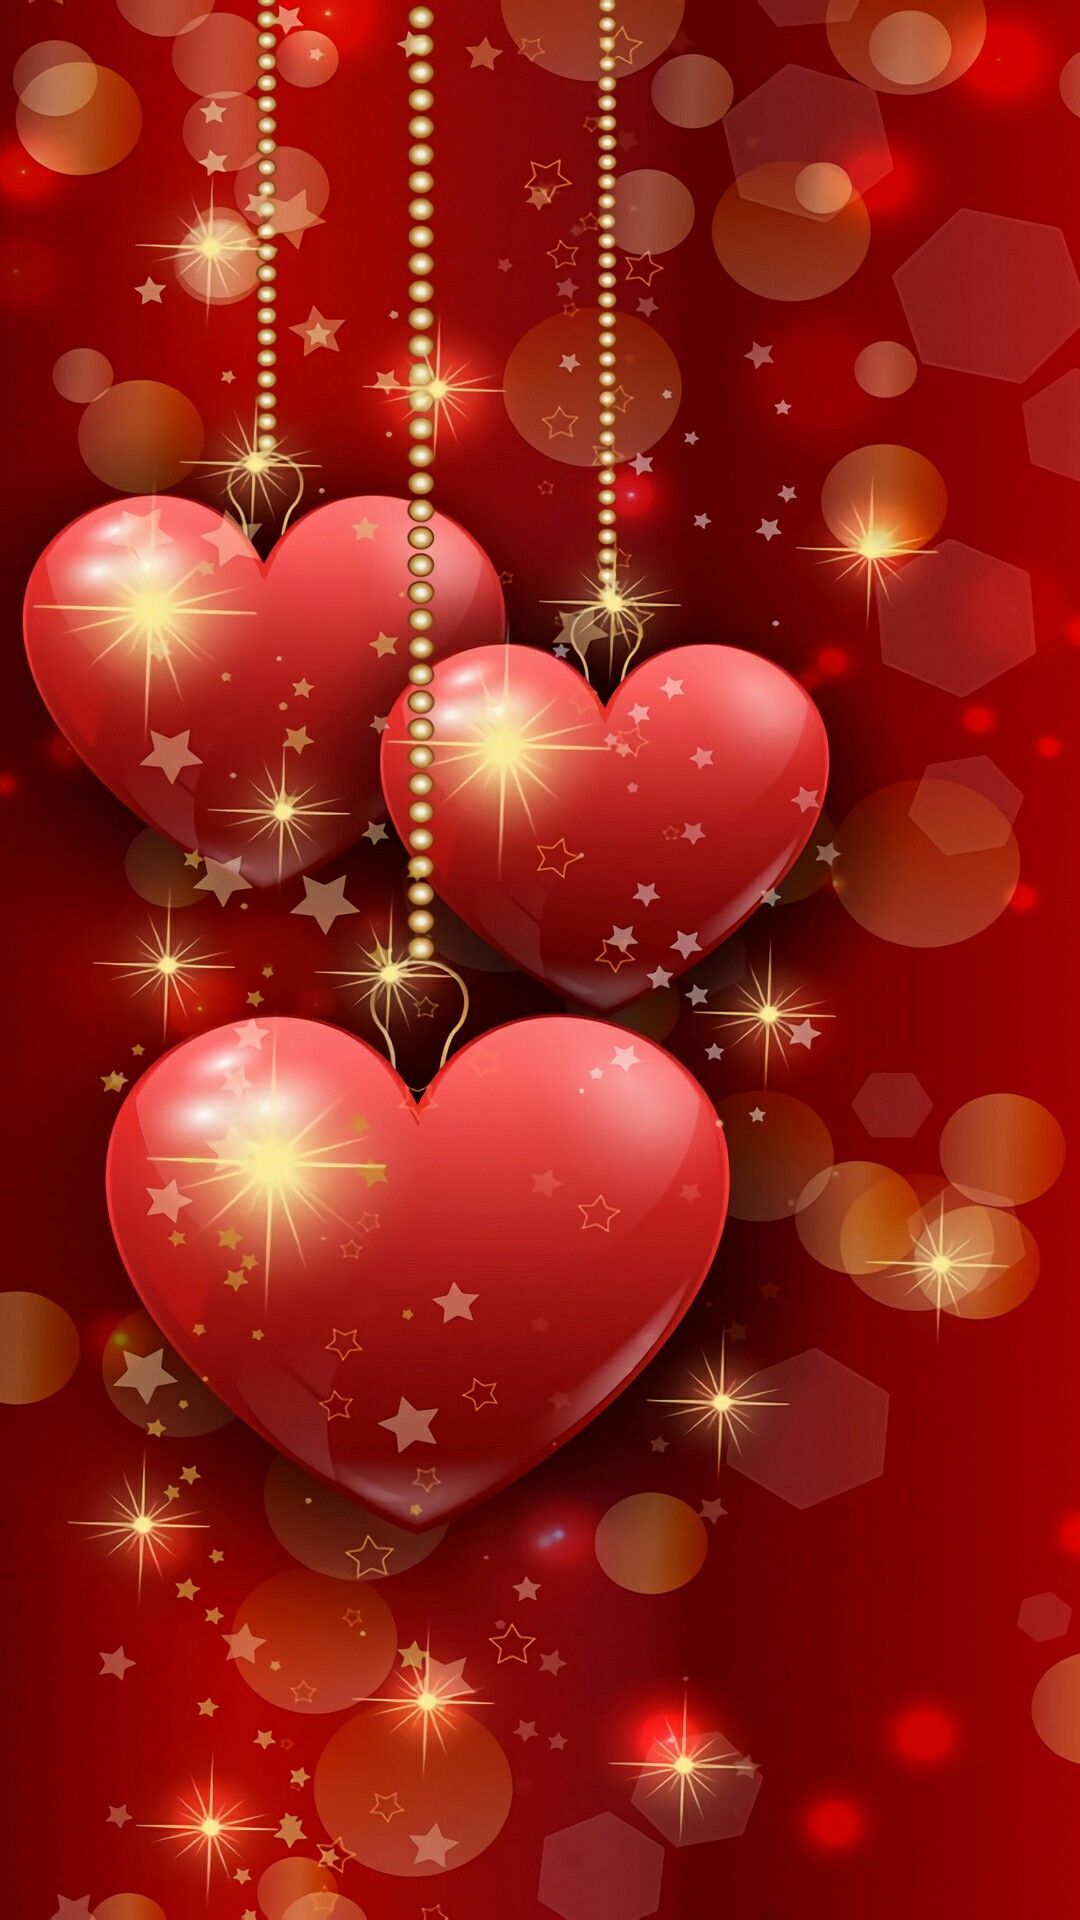 The Color of Red. Heart wallpaper, Wallpaper, Christmas wallpaper